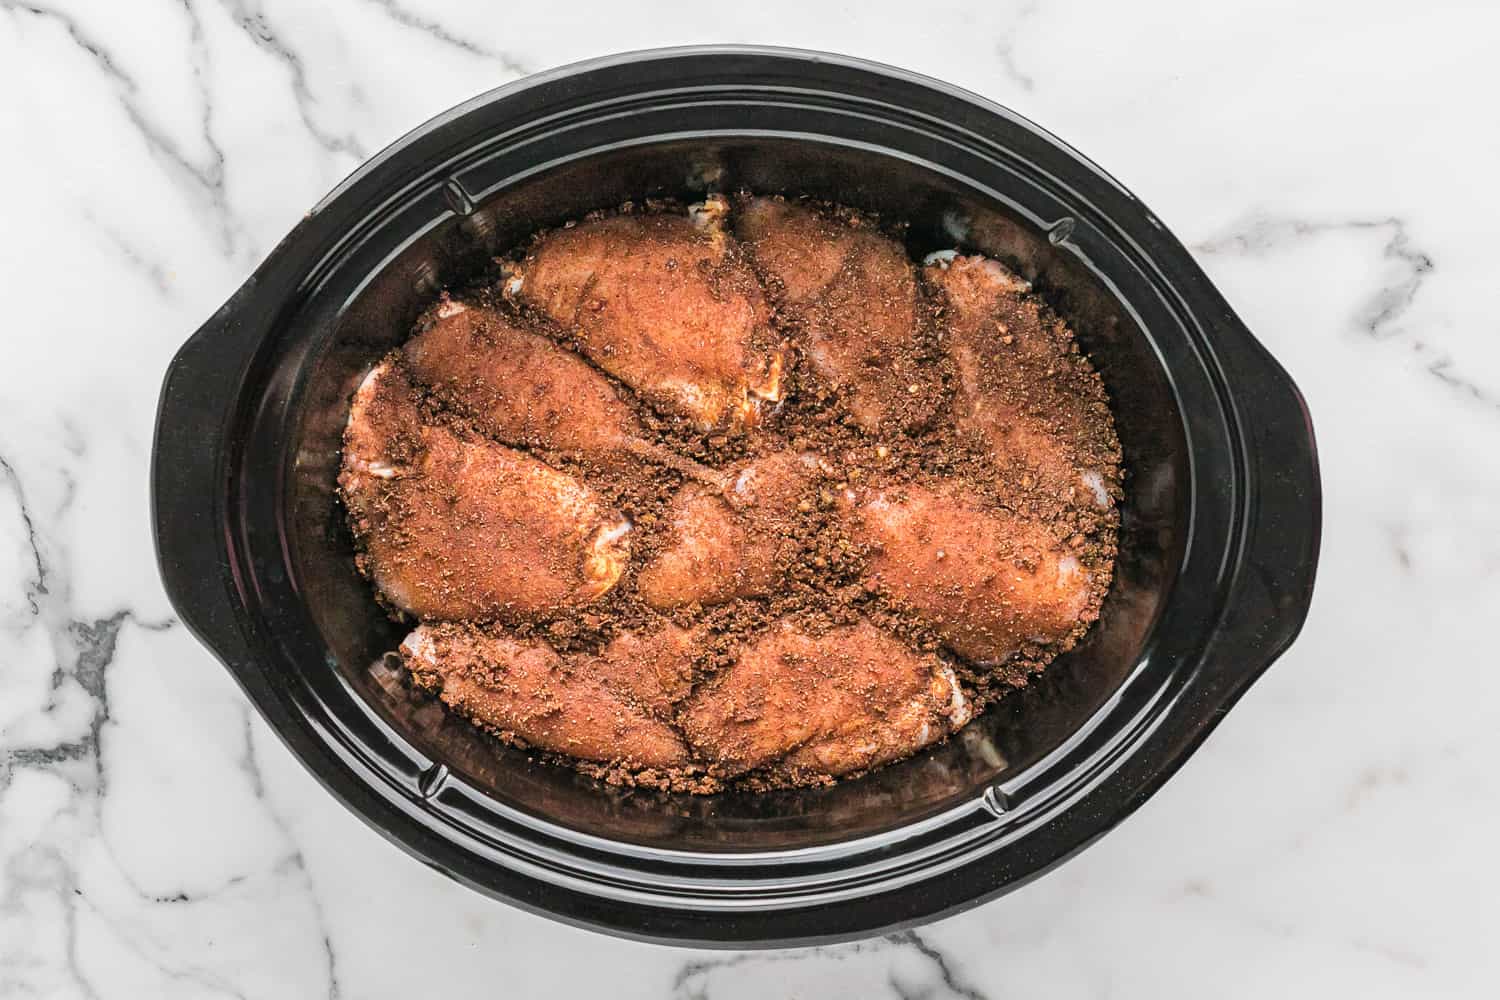 Chicken thighs in slow cooker rubbed with spices.